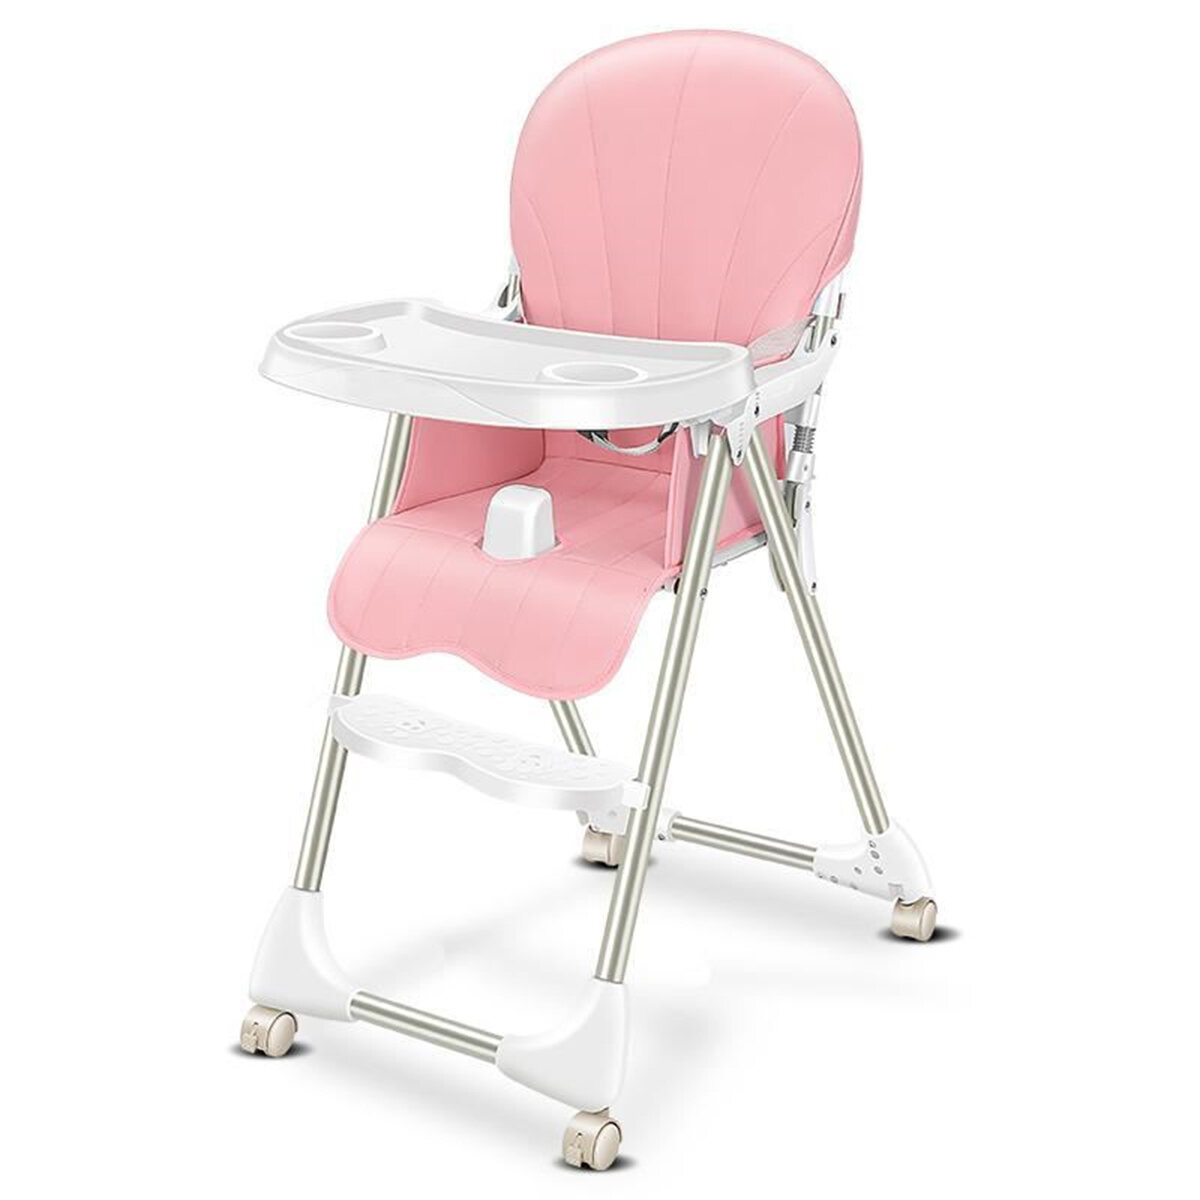 Image of Ditong Portable Folding Baby High Chair Adjustable Plate Lockable Wheels PU Seat with Environmental Protection Material